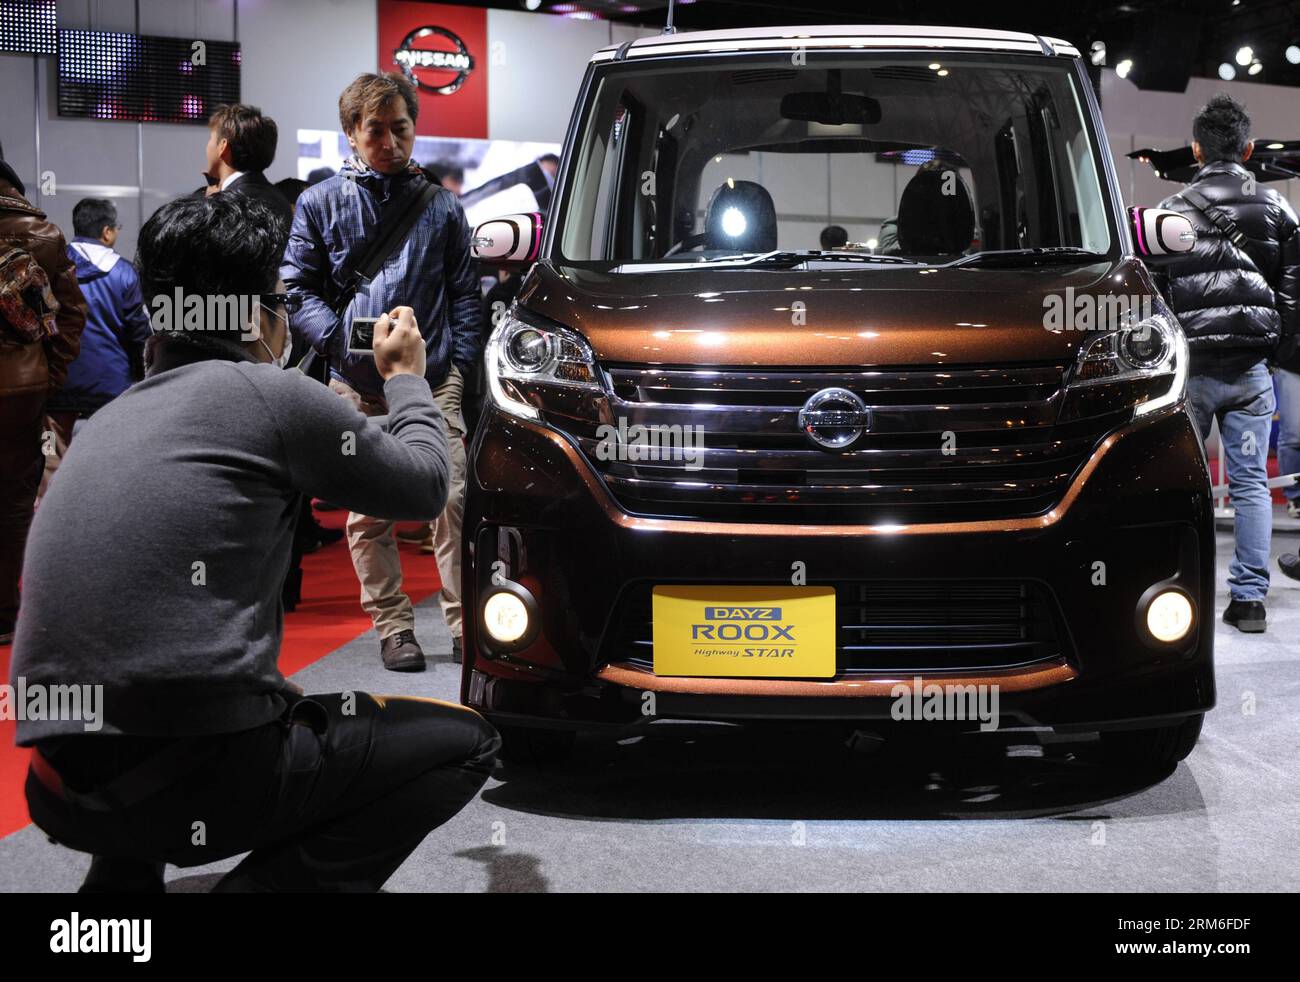 People look at Nissan s Dayz Roox at Tokyo Auto Salon 2014 in Chiba, Japan, Jan. 10, 2014. Some 400 companies participated in the 3-day event, which was held until Jan. 12. (Xinhua/Stringer) JAPAN-TOKYO AUTO SALON 2014-EVENT PUBLICATIONxNOTxINxCHN   Celebrities Look AT Nissan S   AT Tokyo Car Salon 2014 in Chiba Japan Jan 10 2014 Some 400 Companies participated in The 3 Day Event Which what Hero Until Jan 12 XINHUA Stringer Japan Tokyo Car Salon 2014 Event PUBLICATIONxNOTxINxCHN Stock Photo